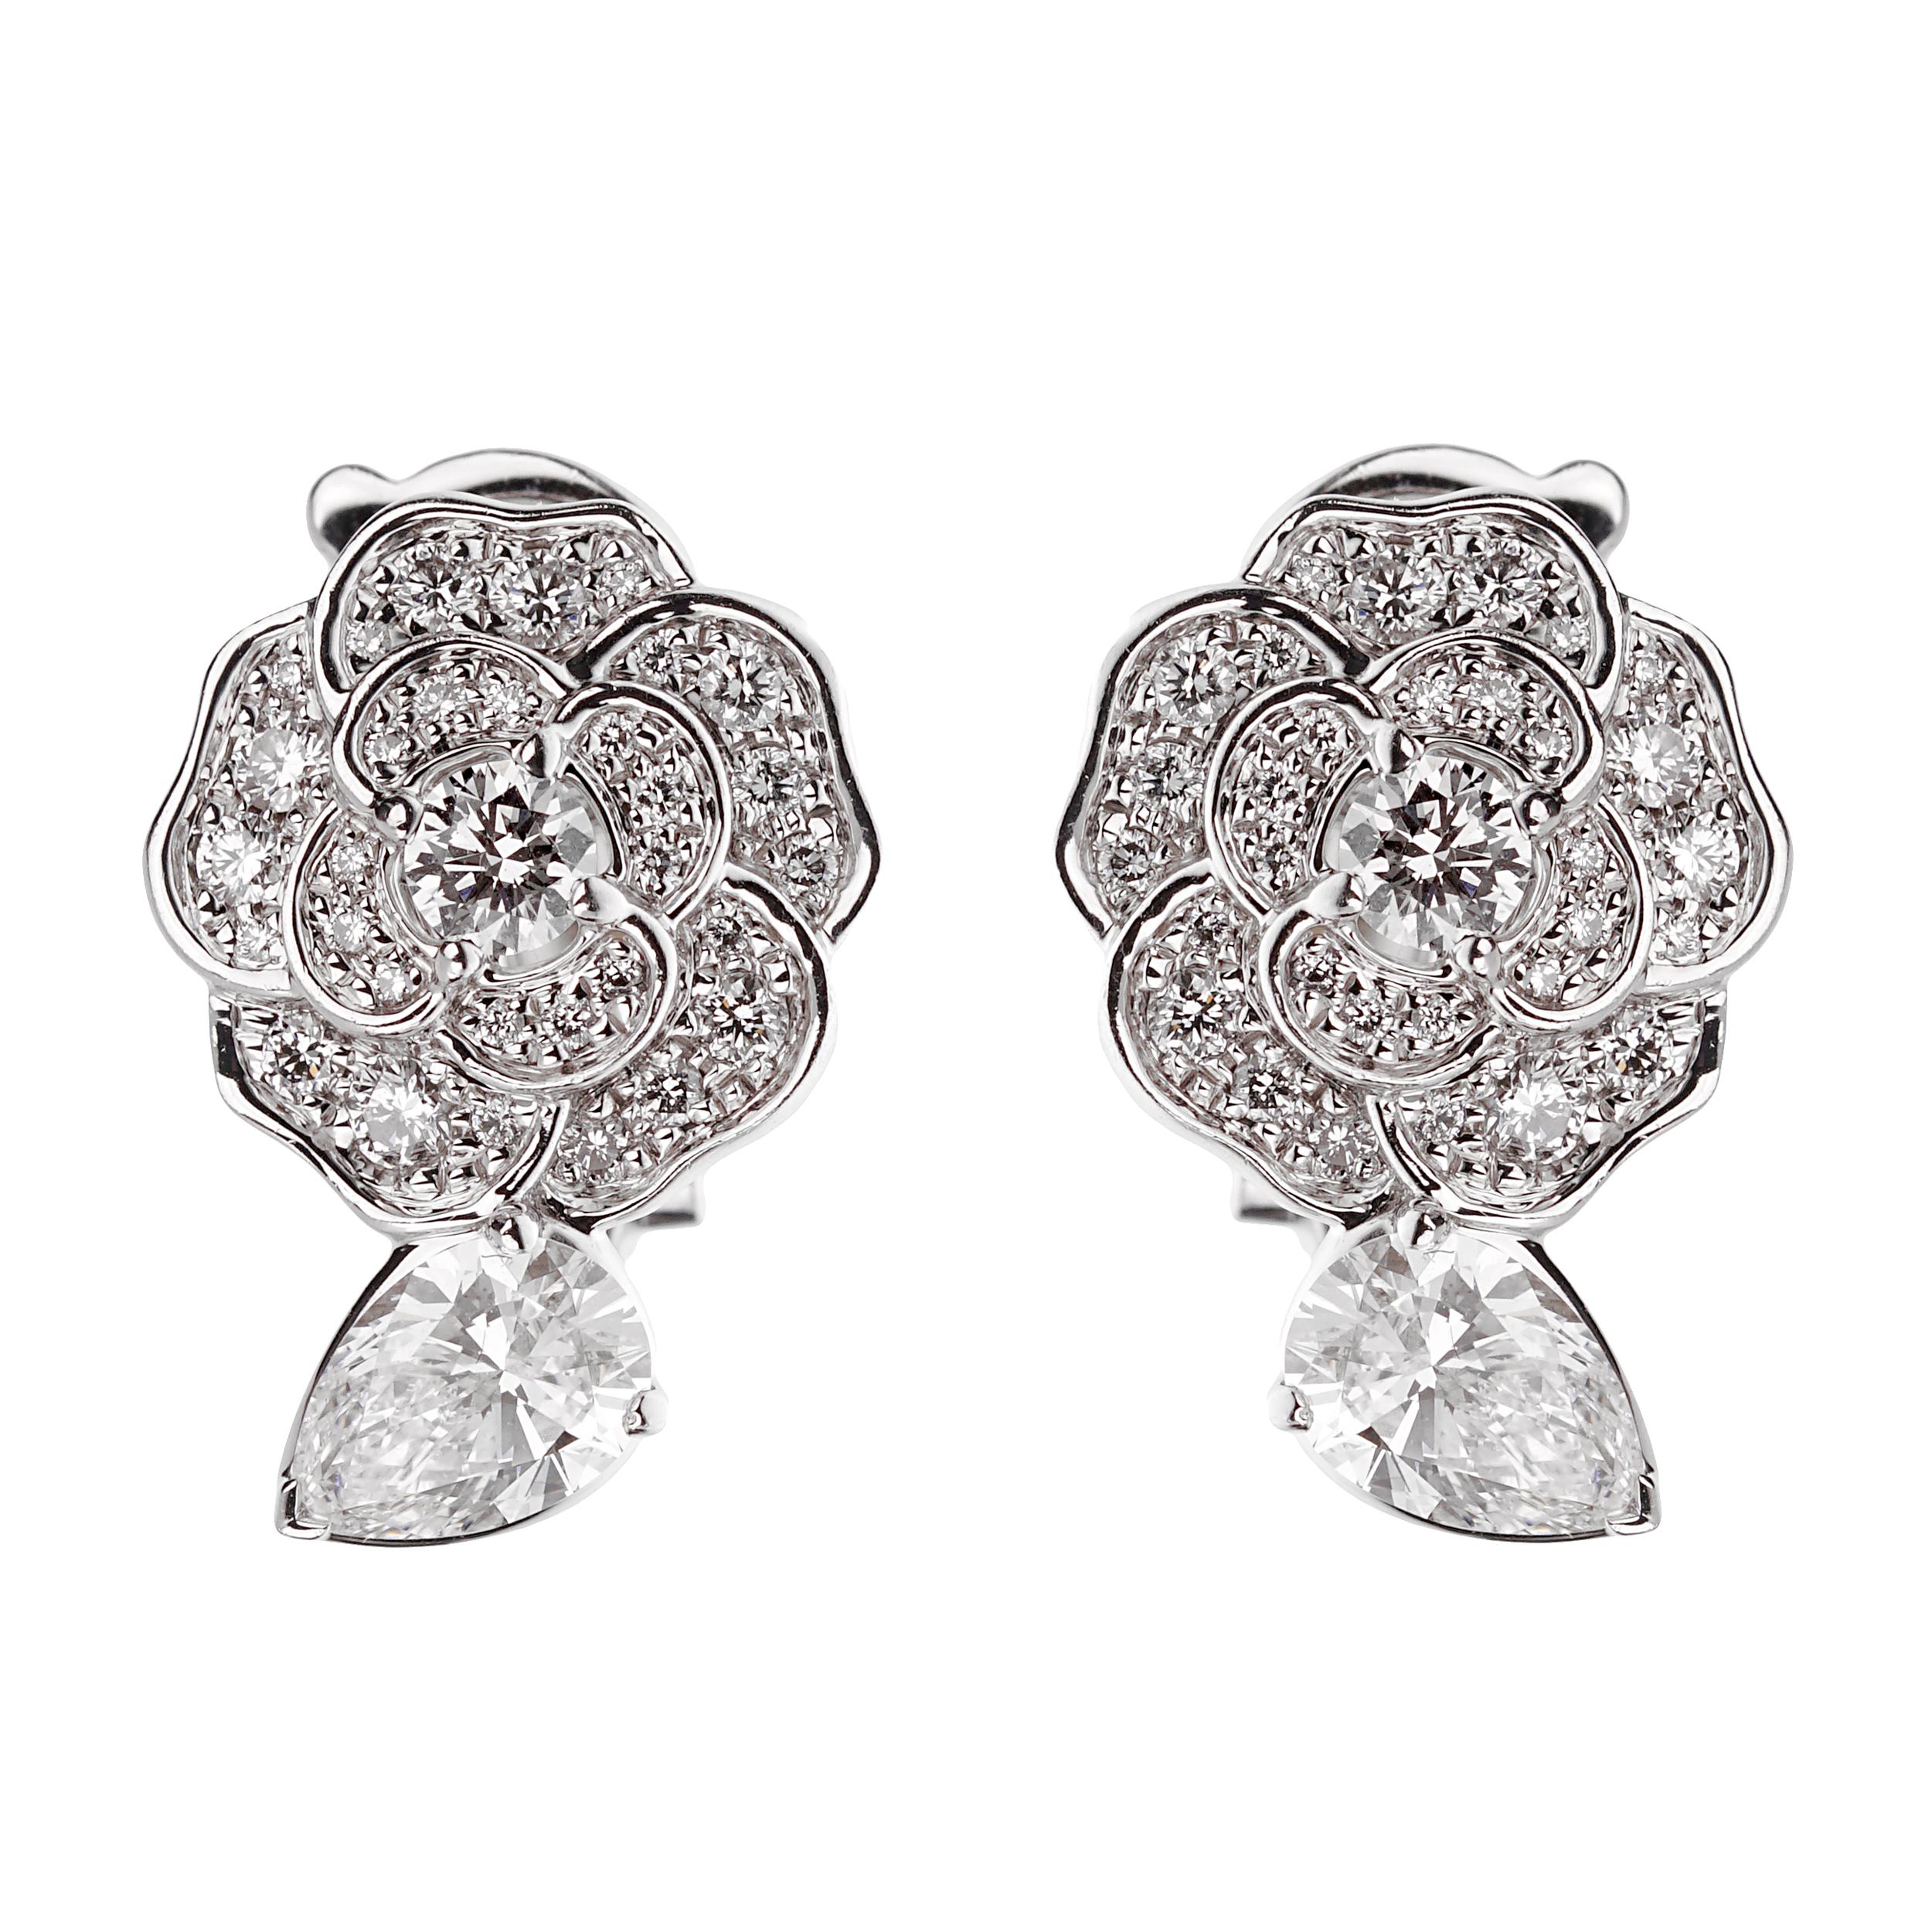 Chanel Camelia Precieux Diamond White Gold Earrings In Excellent Condition For Sale In Feasterville, PA